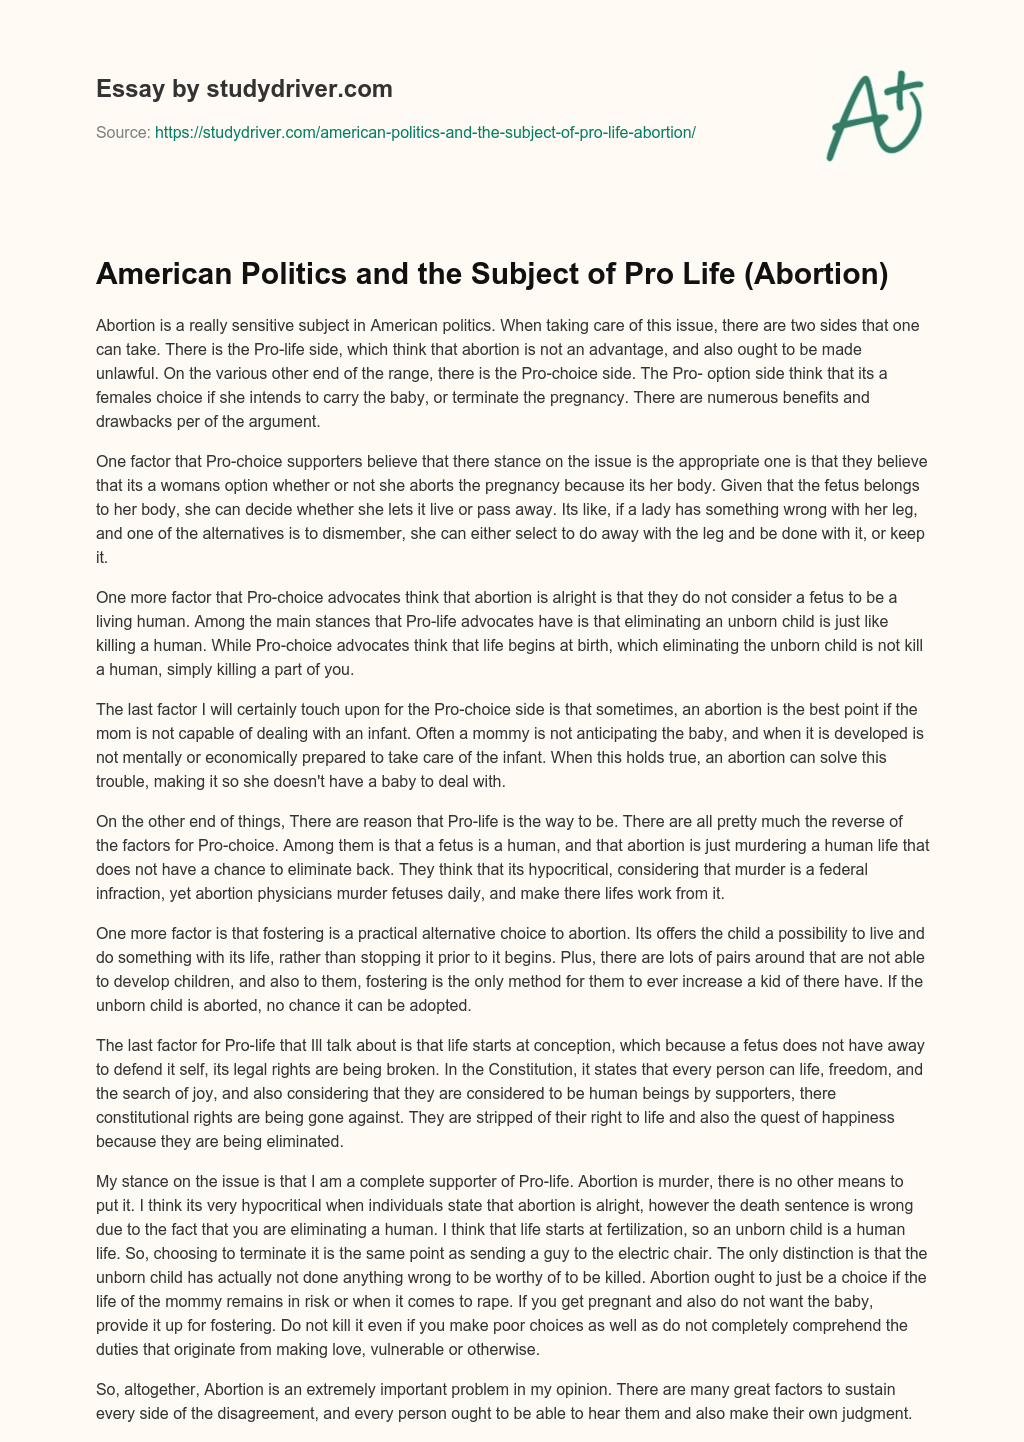 American Politics and the Subject of Pro Life (Abortion) essay